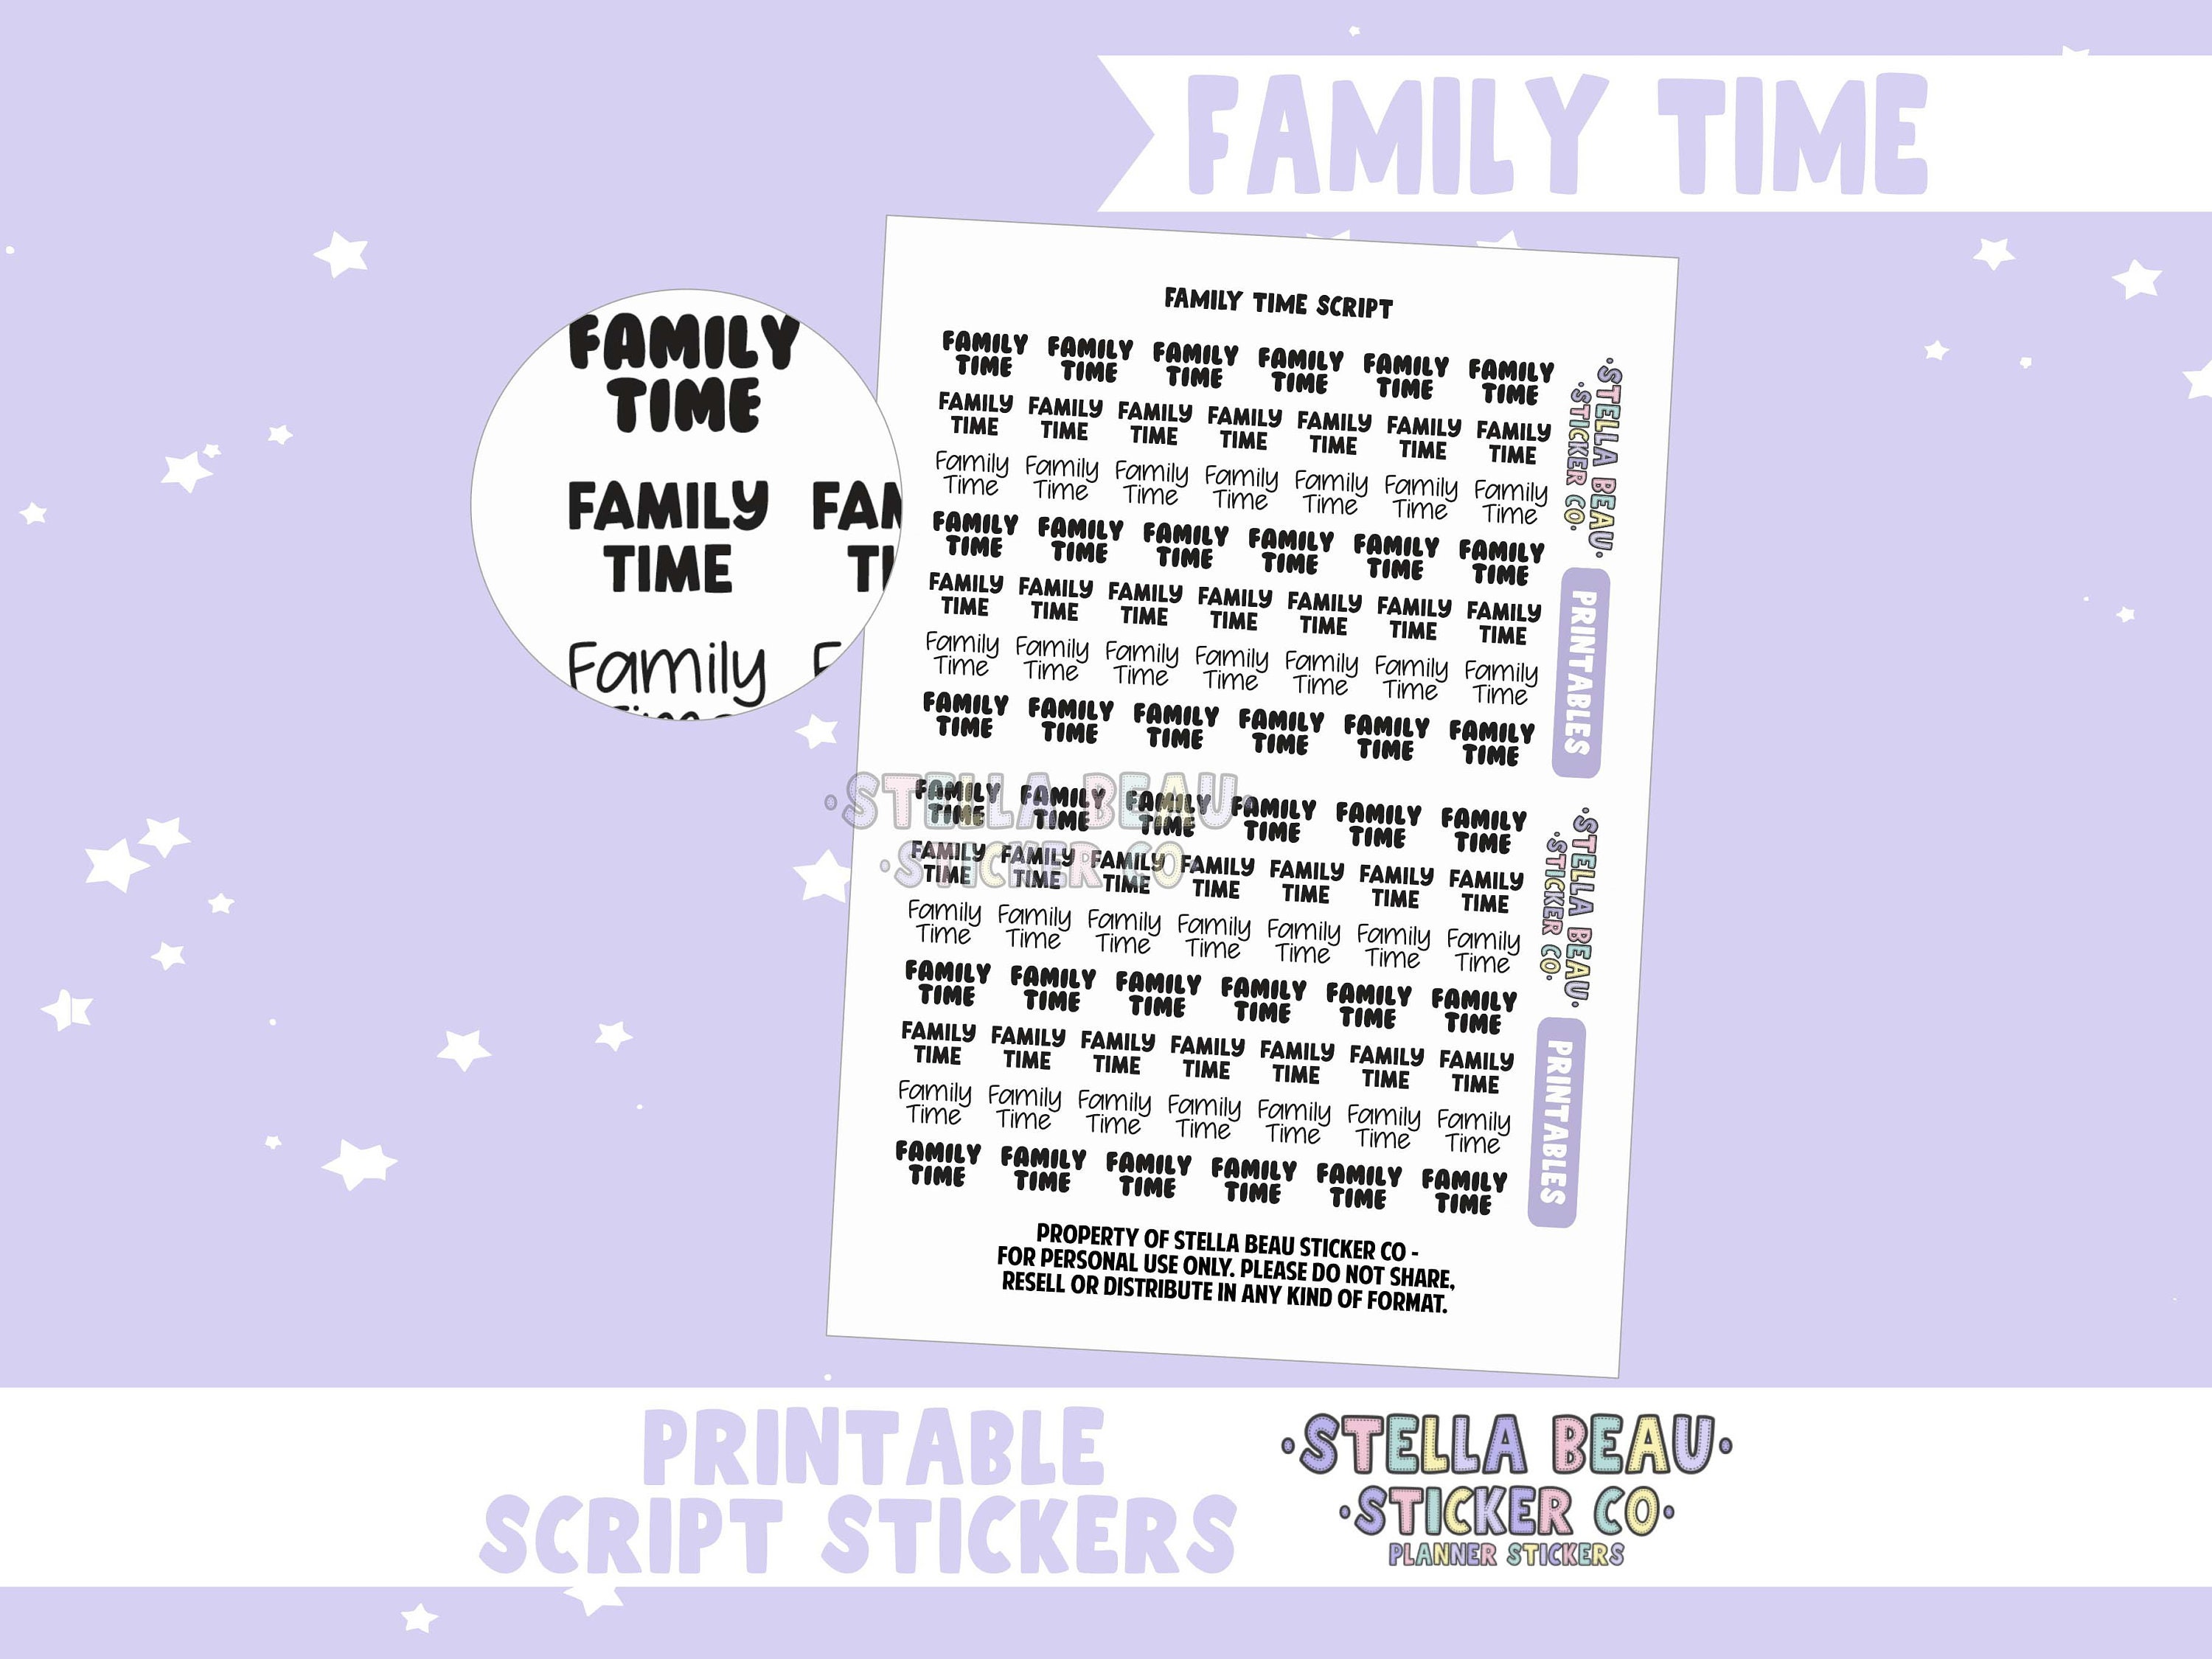 Family Stickers Printable Script Planner Stickers Family Planner Stickers PDF Family Time Script Planner Stickers Printable CUT Files